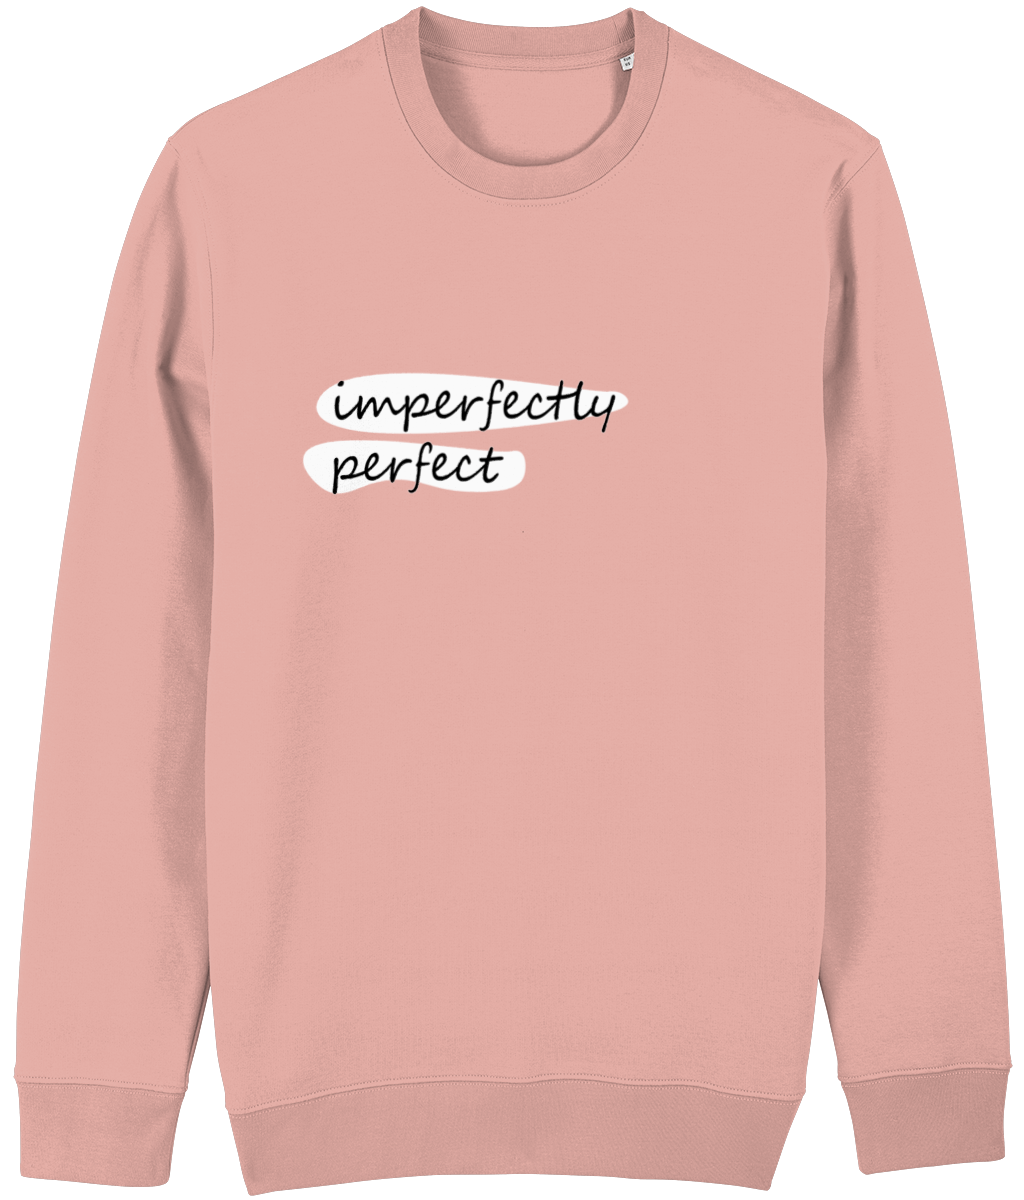 imperfectly perfect Jumper